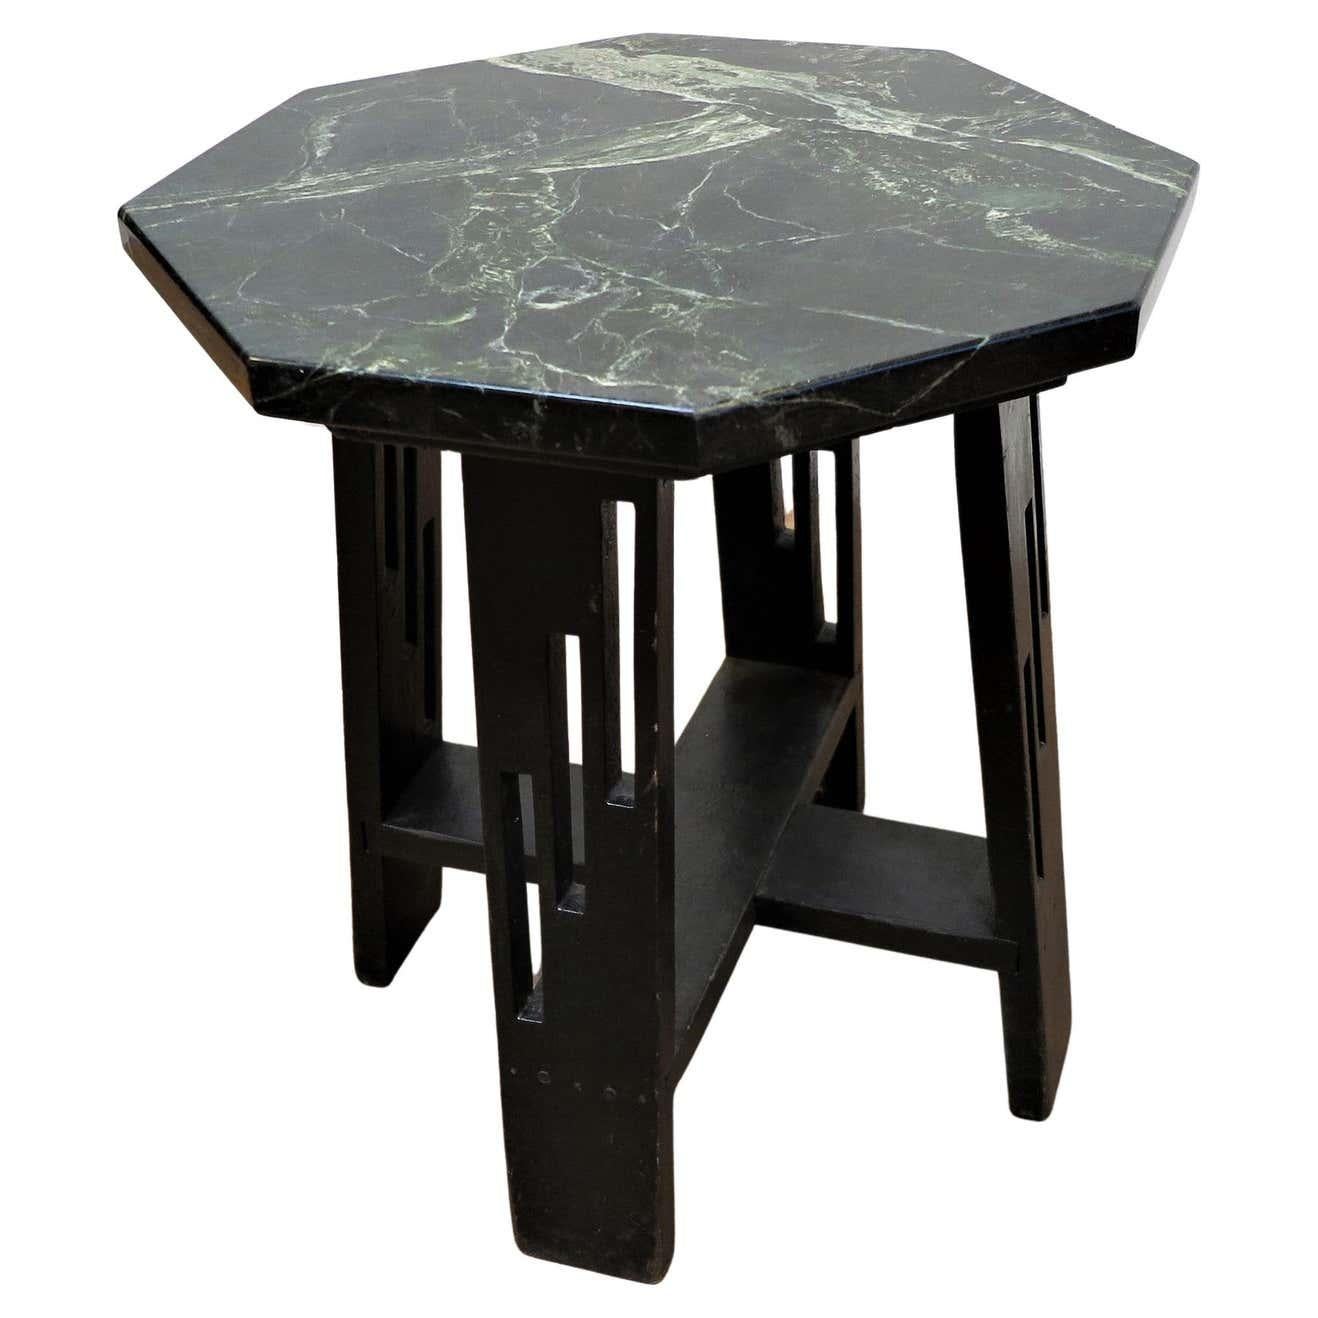 Arts & Crafts Mid century Hexagon marble toped side table. Early middle century, 1930-40 possibly earlier. Very nice black green hexagon marble top with polished soft edges set on four slightly splayed legs. Each leg having a staggered three slot